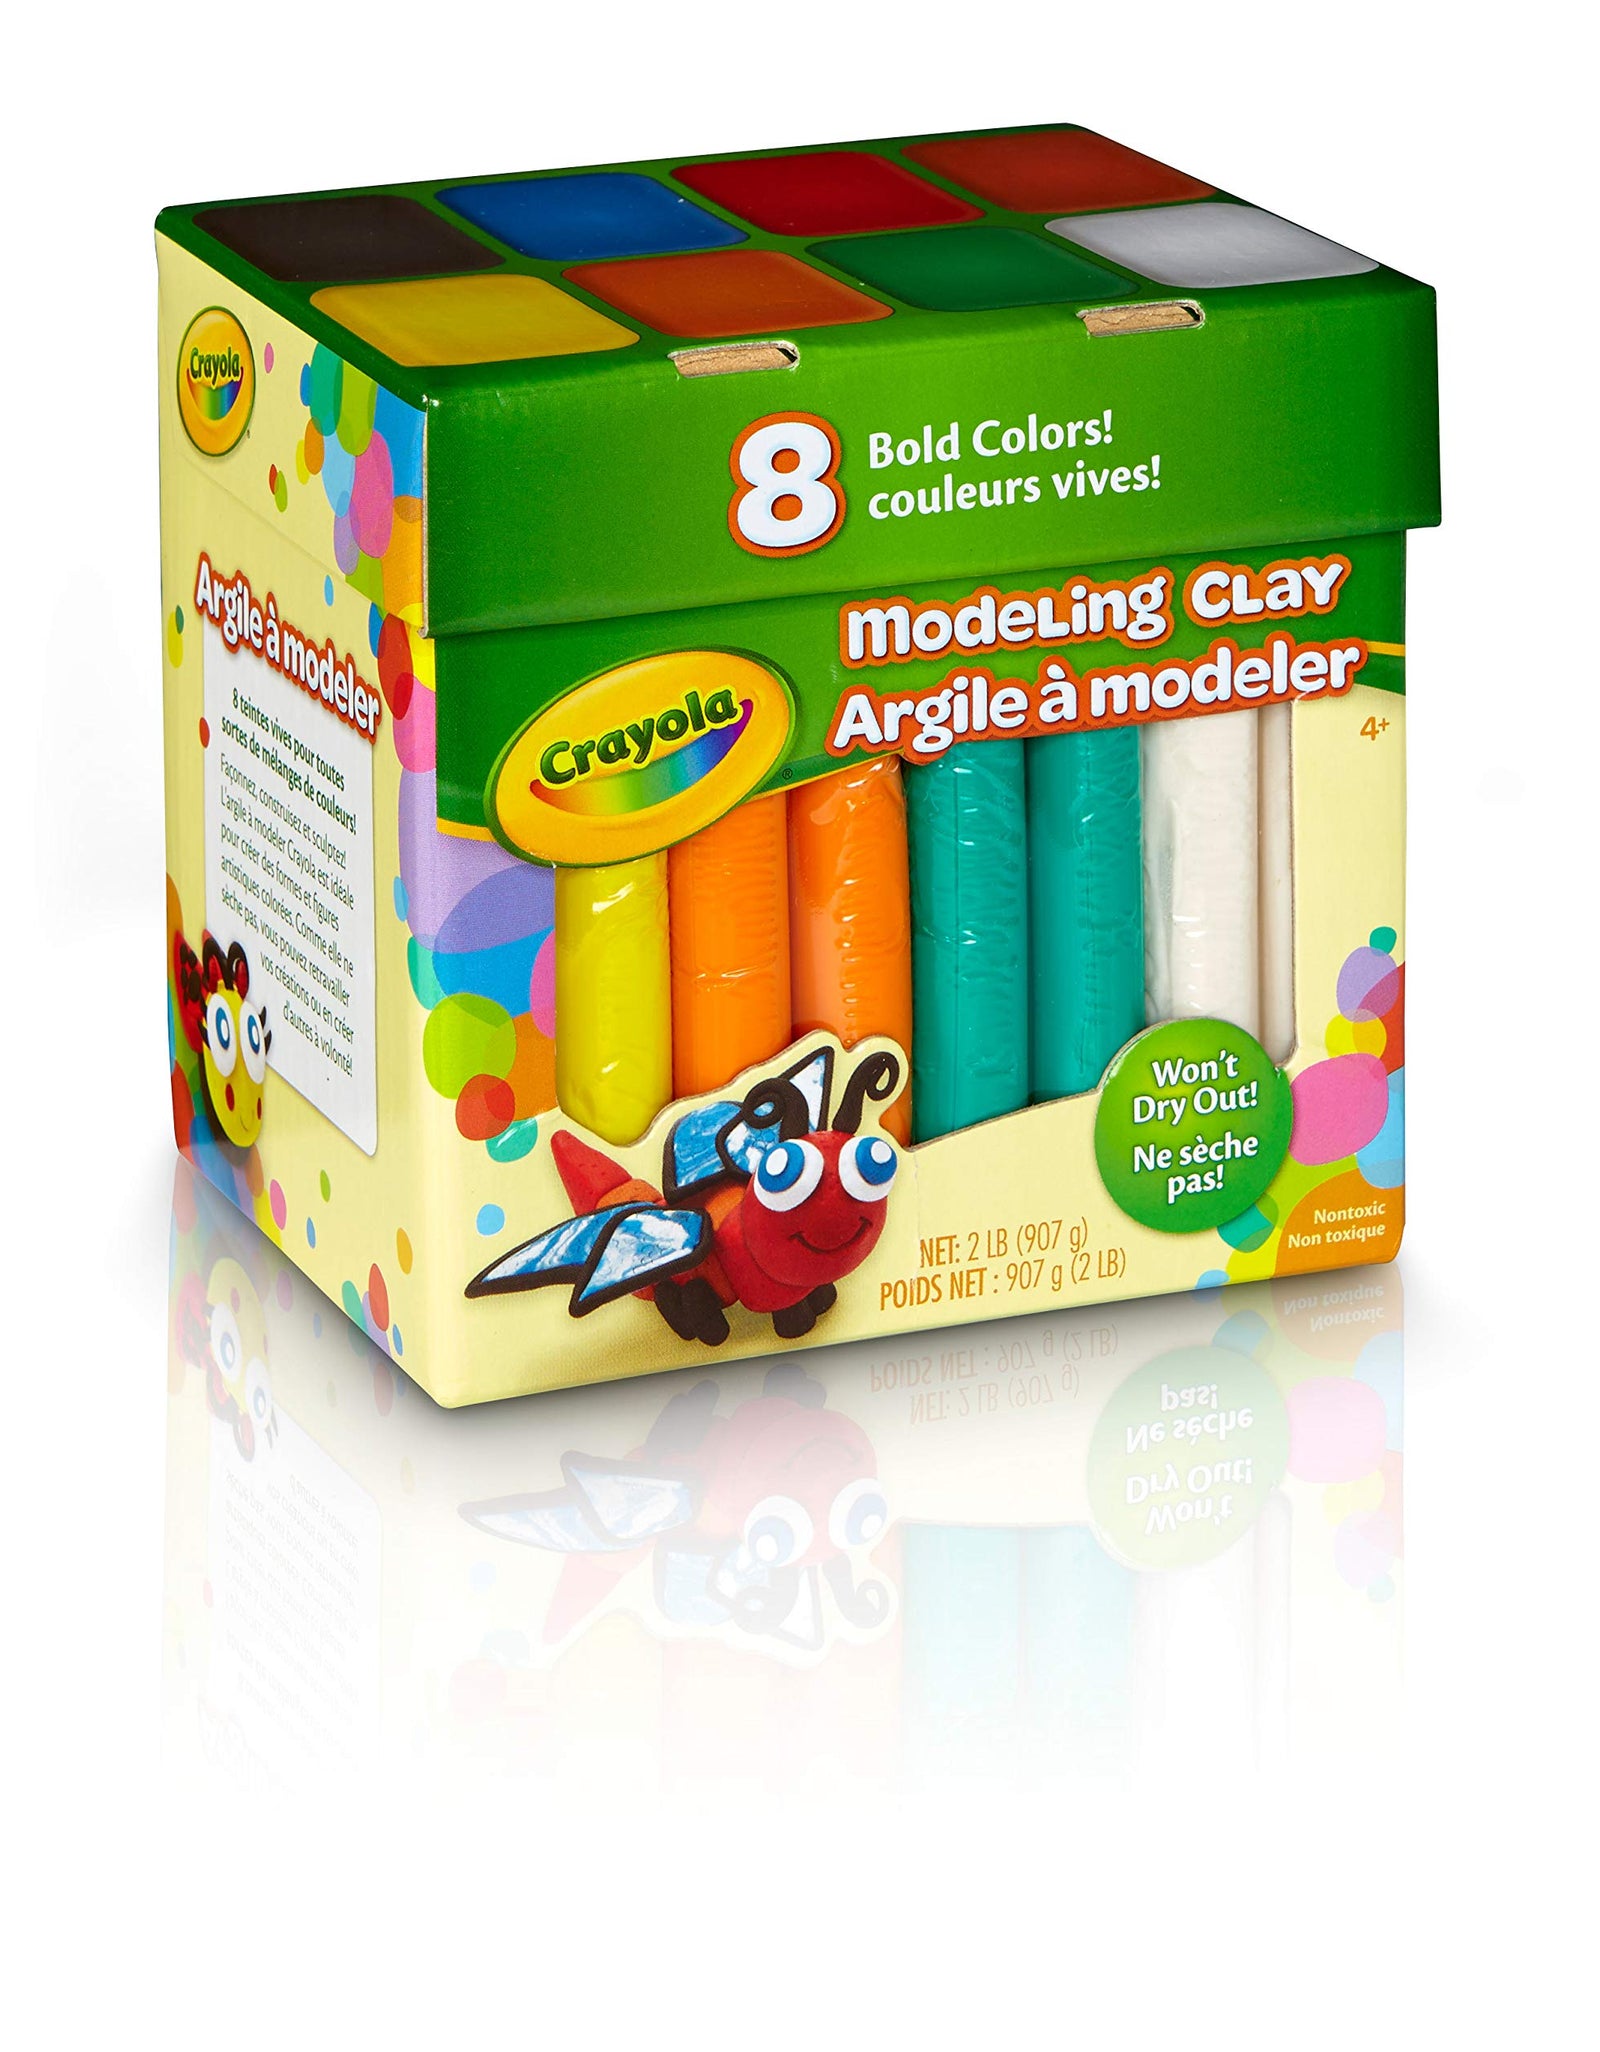 Crayola Modeling Clay in Bold Colors, 2lbs, Gift for Kids, Ages 4 & Up